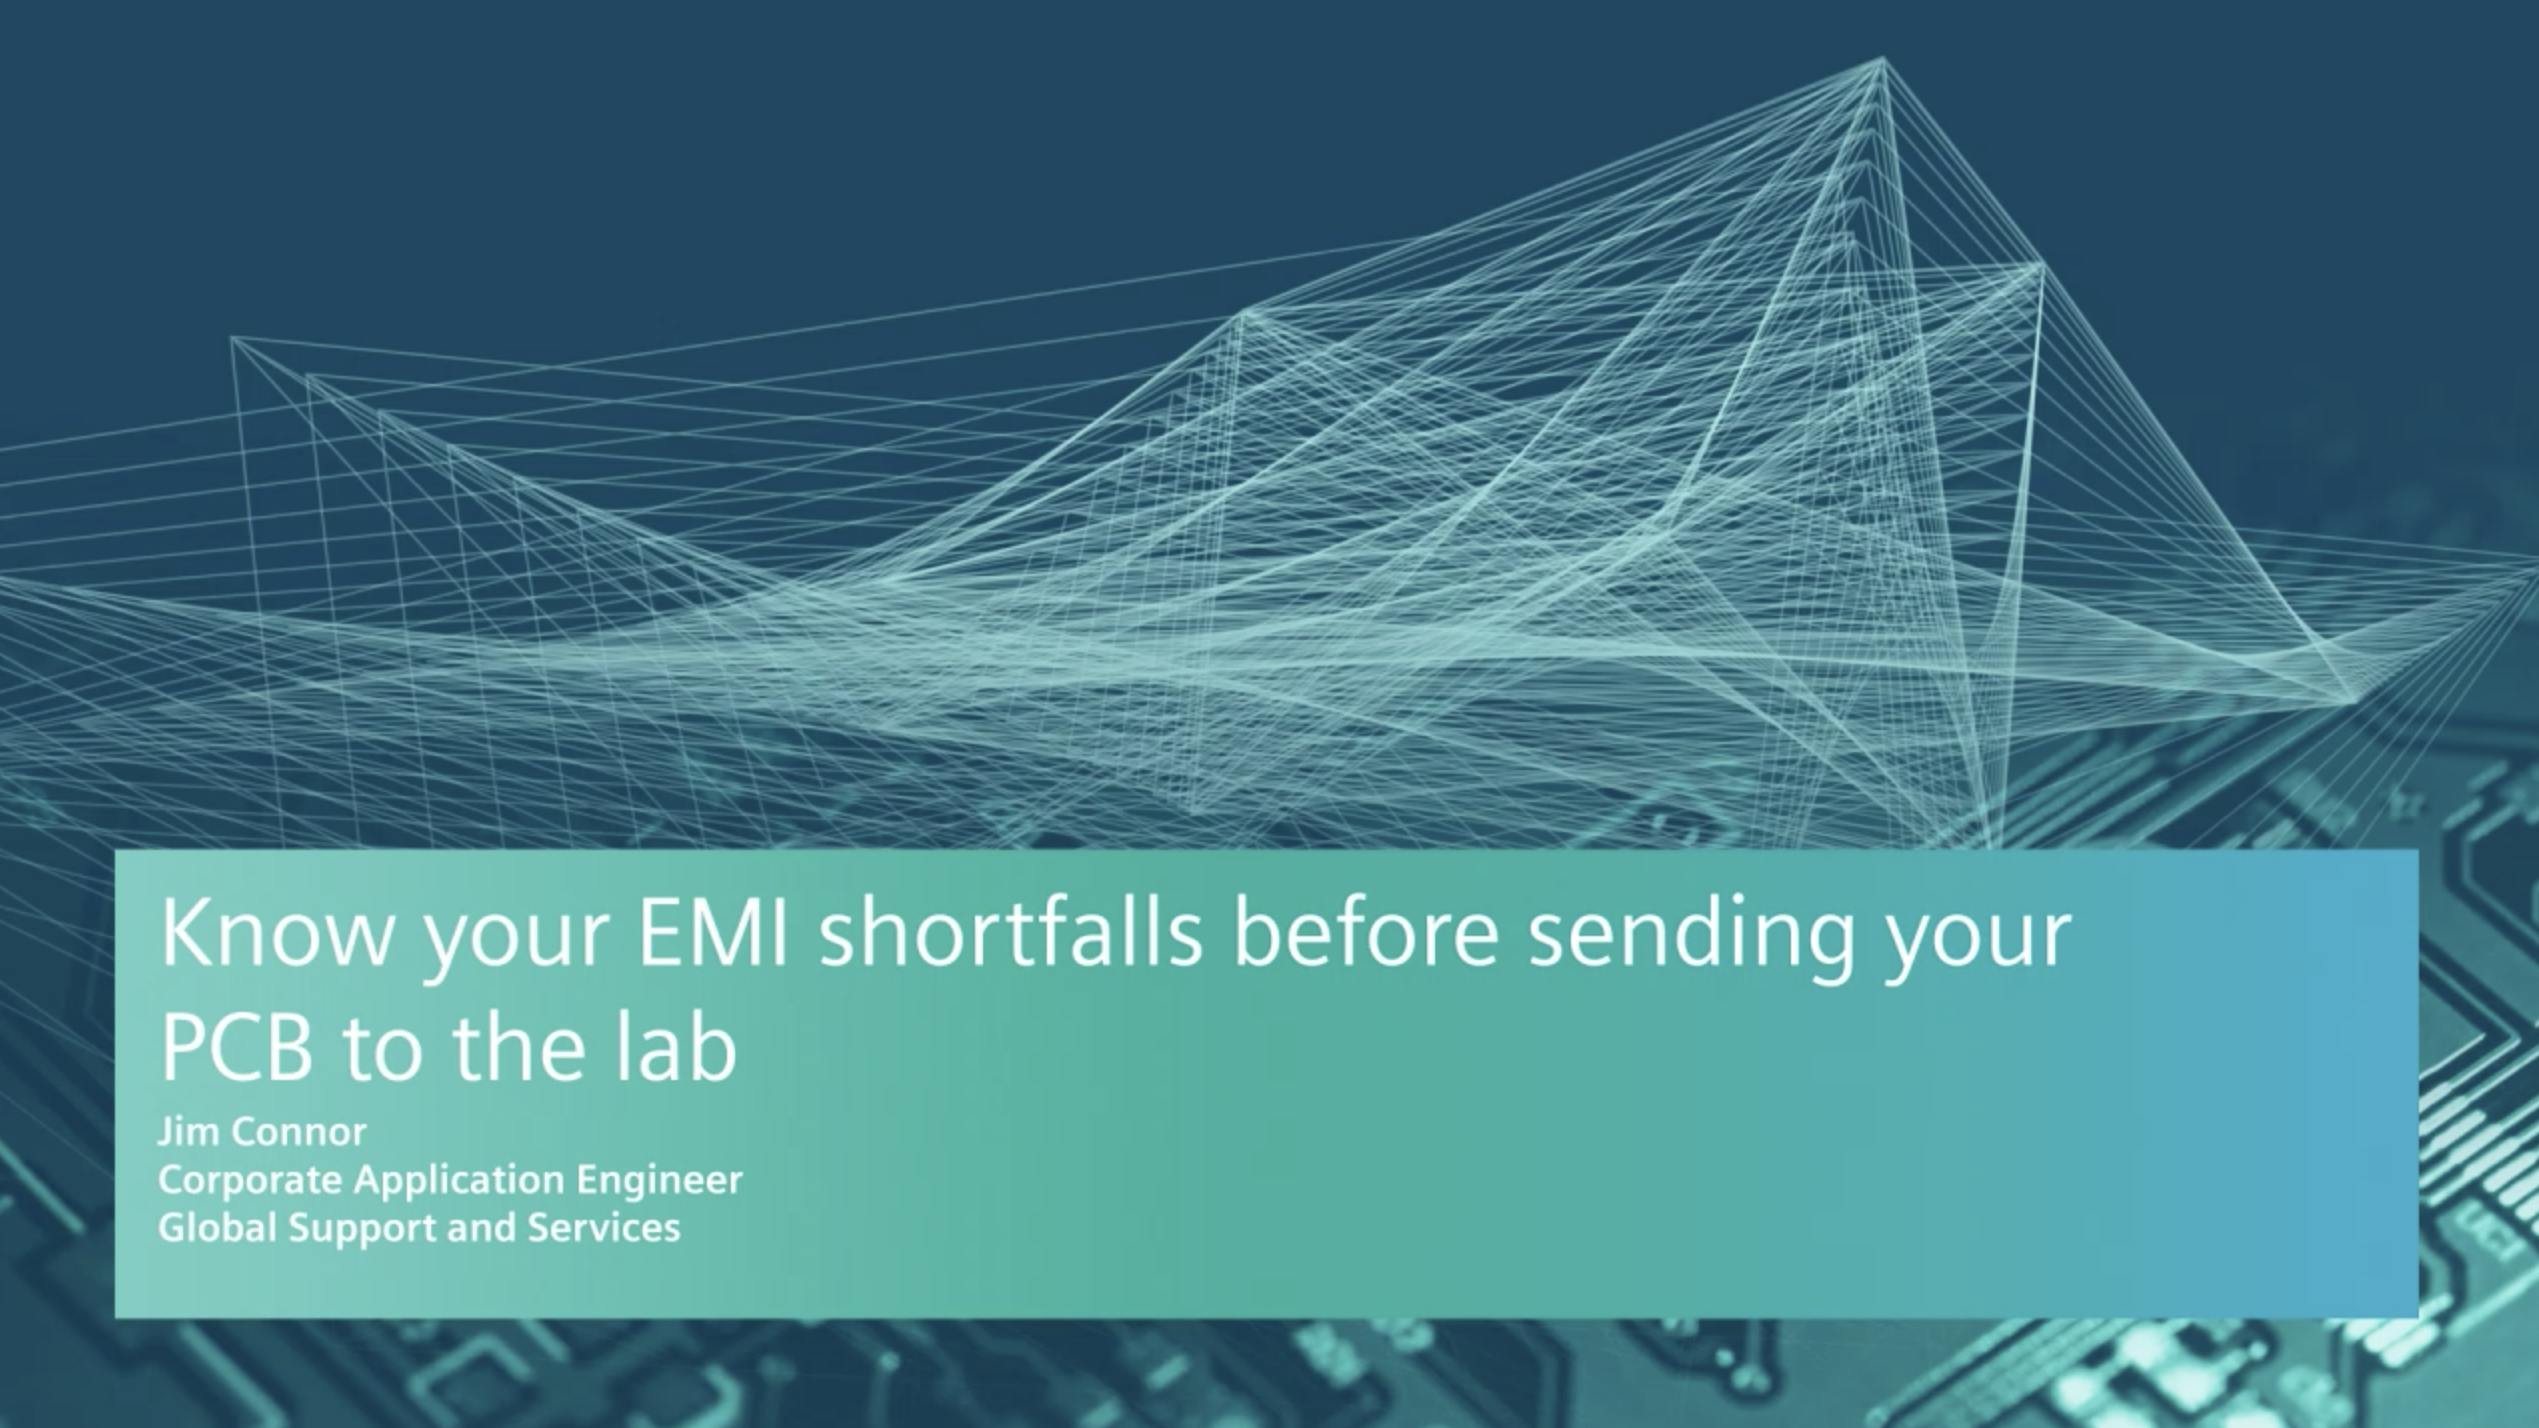 Know your EMI shortfalls before sending your PCB to the lab